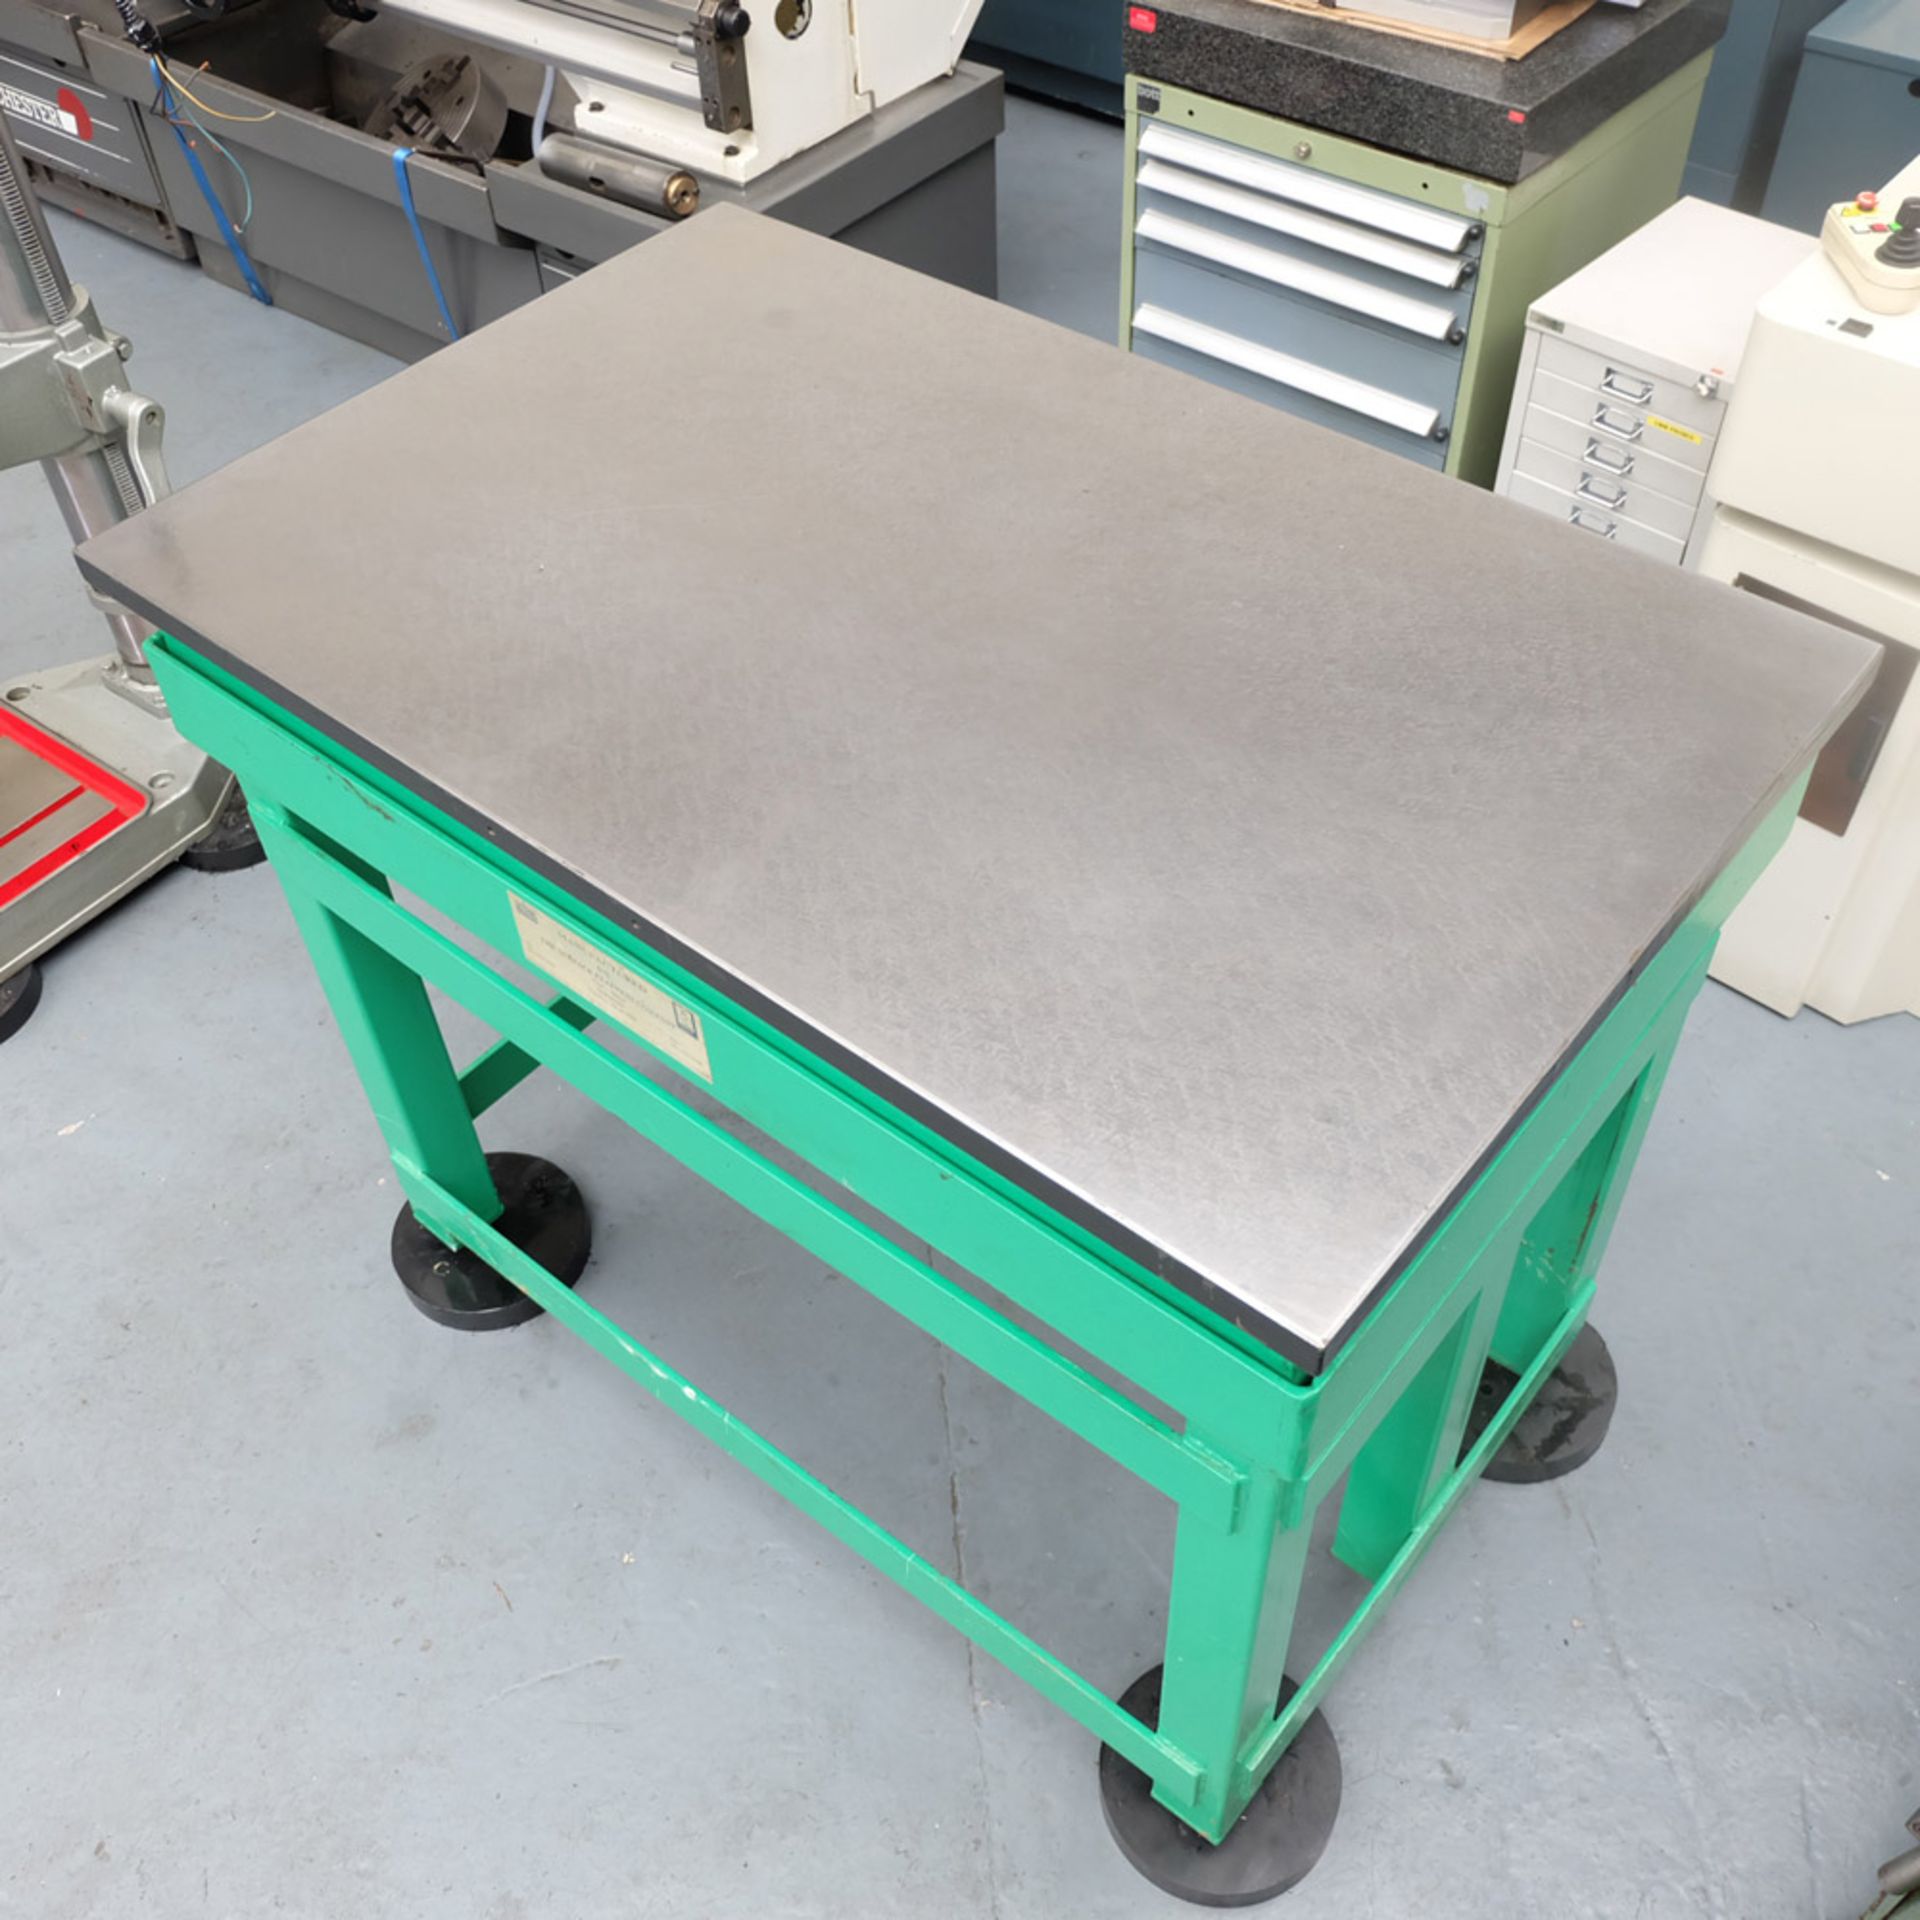 Cast Iron Tool Room Surface Table. Grade 1. Manufactured by surface Flatness Co. Size 48" x 30". - Image 3 of 6